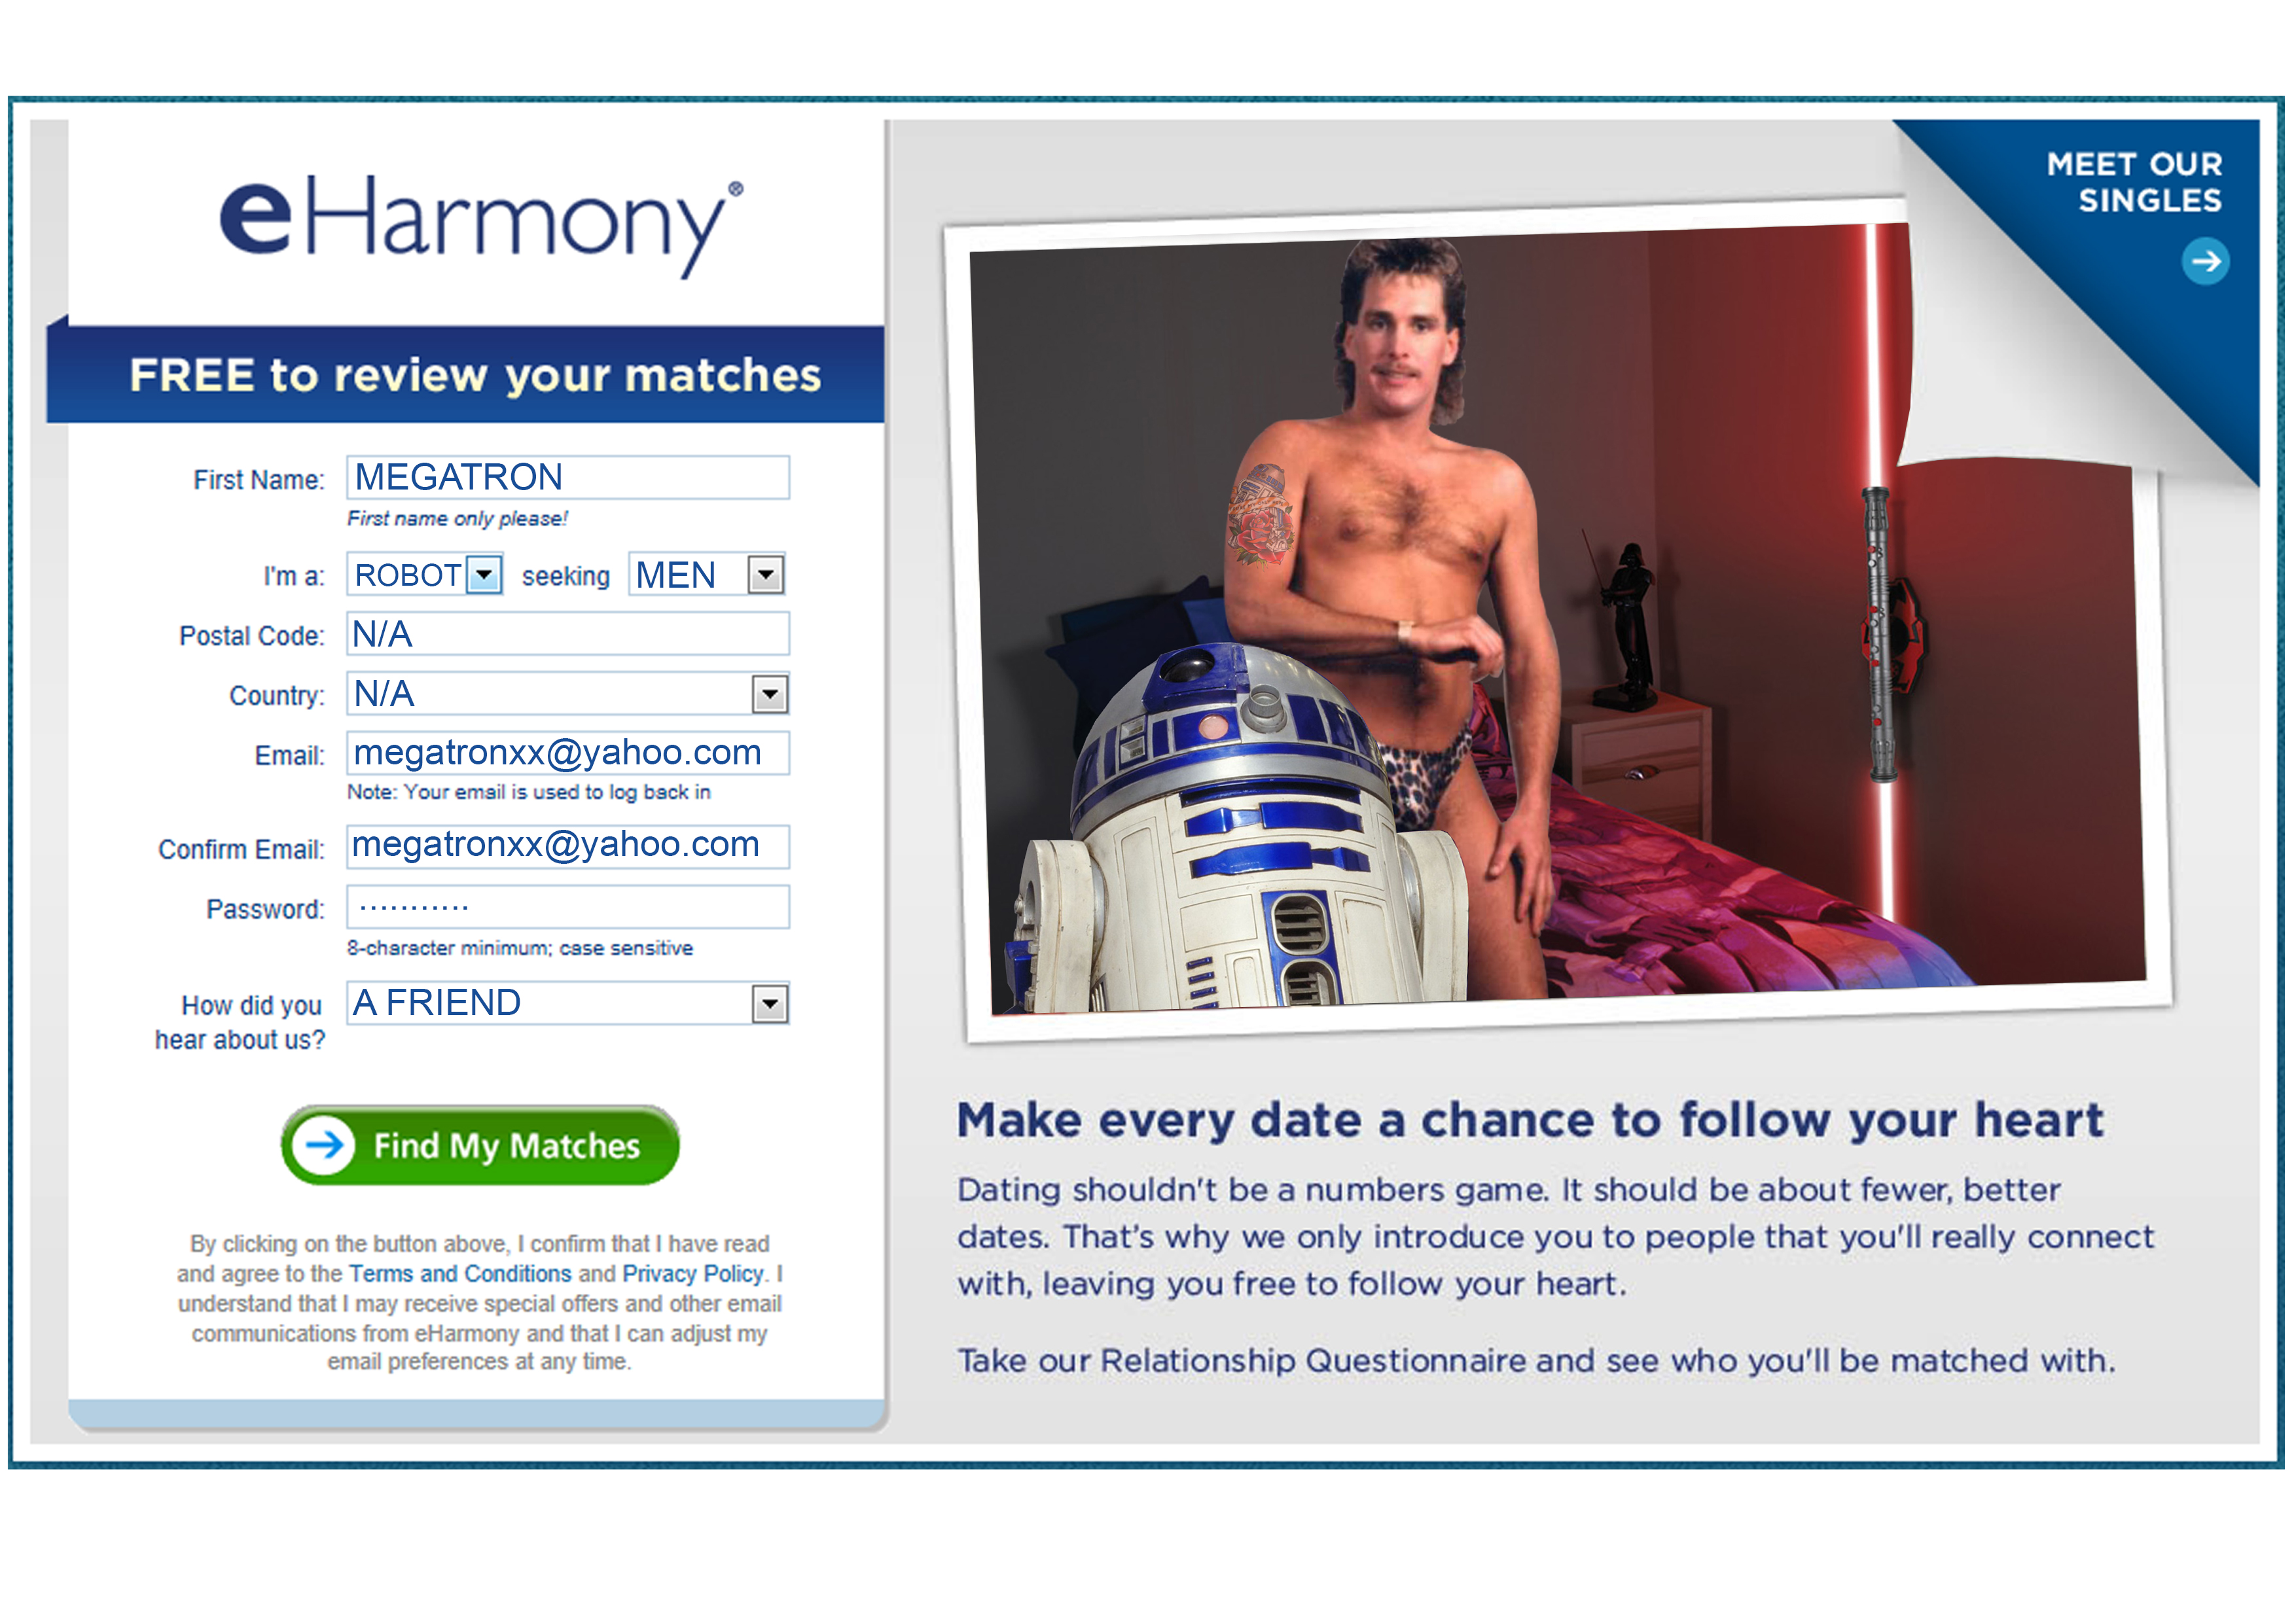 r2d2 and c3po - Meet Our Singles e Harmony Free to review your matches First Name Megatron Finanony I'm a Robot soking Men Postal Code Na Country NA Emait megatronxx.com Note Your email to log booki Contirm Emas megatronxx.com Password Bcharacter How did 